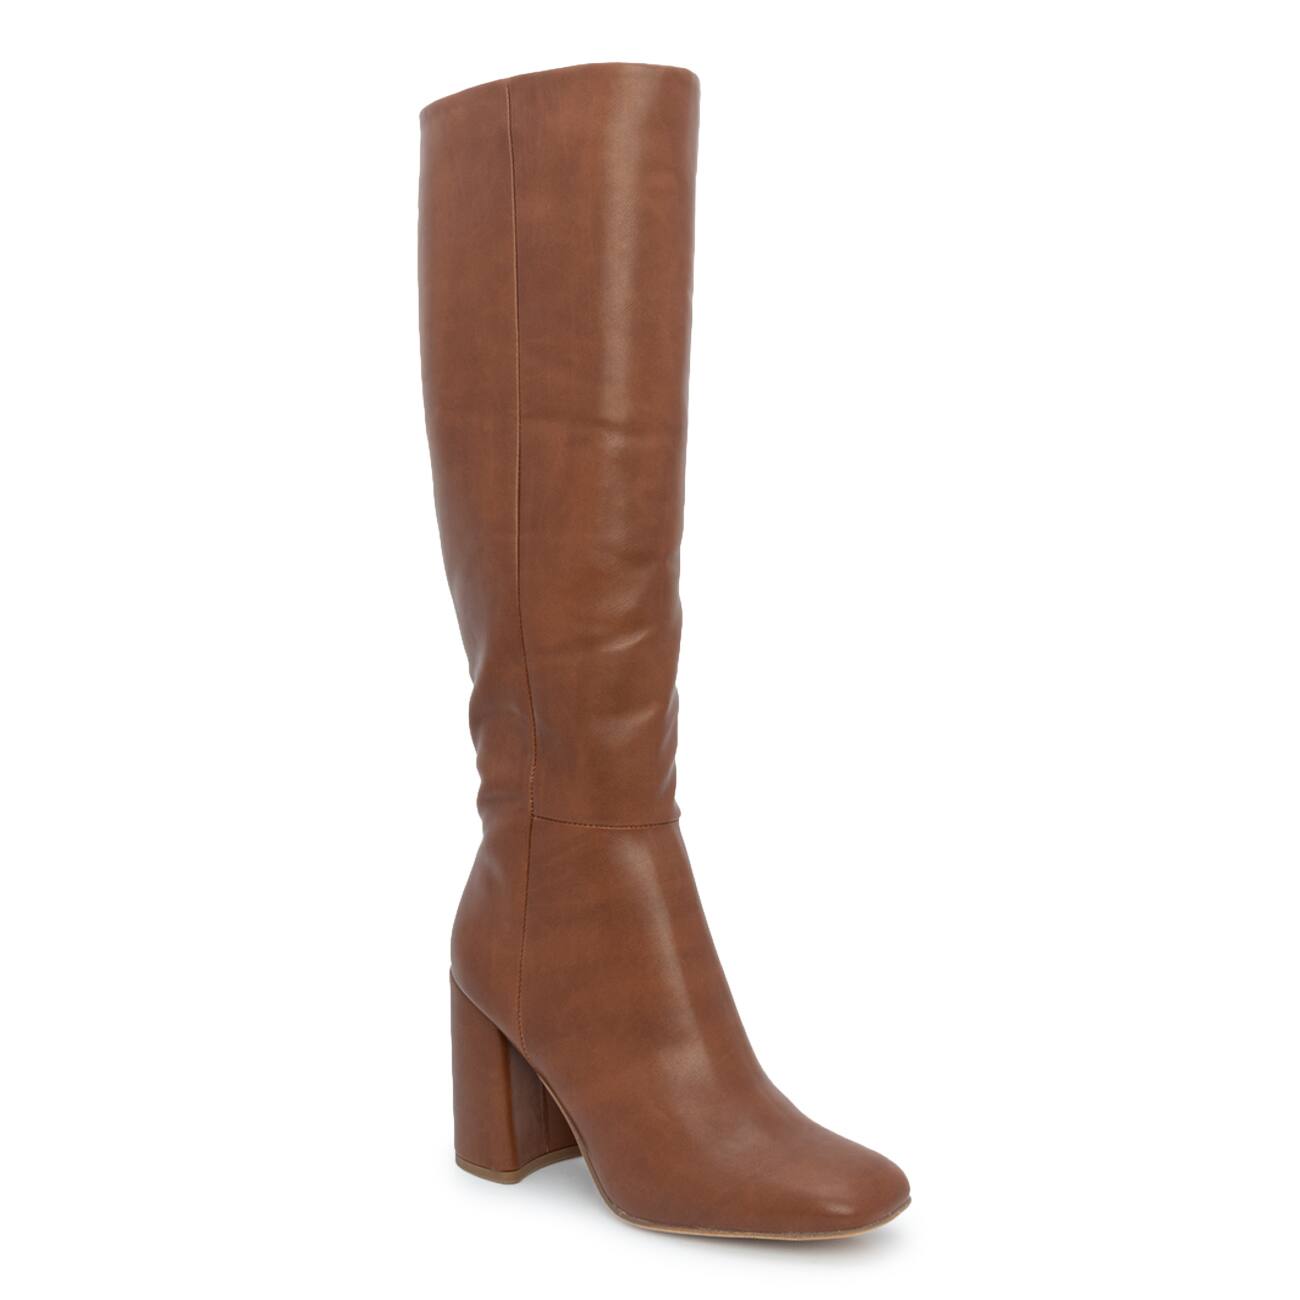 madden girl by Steve Madden William Knee High Boot | The Shoe Company